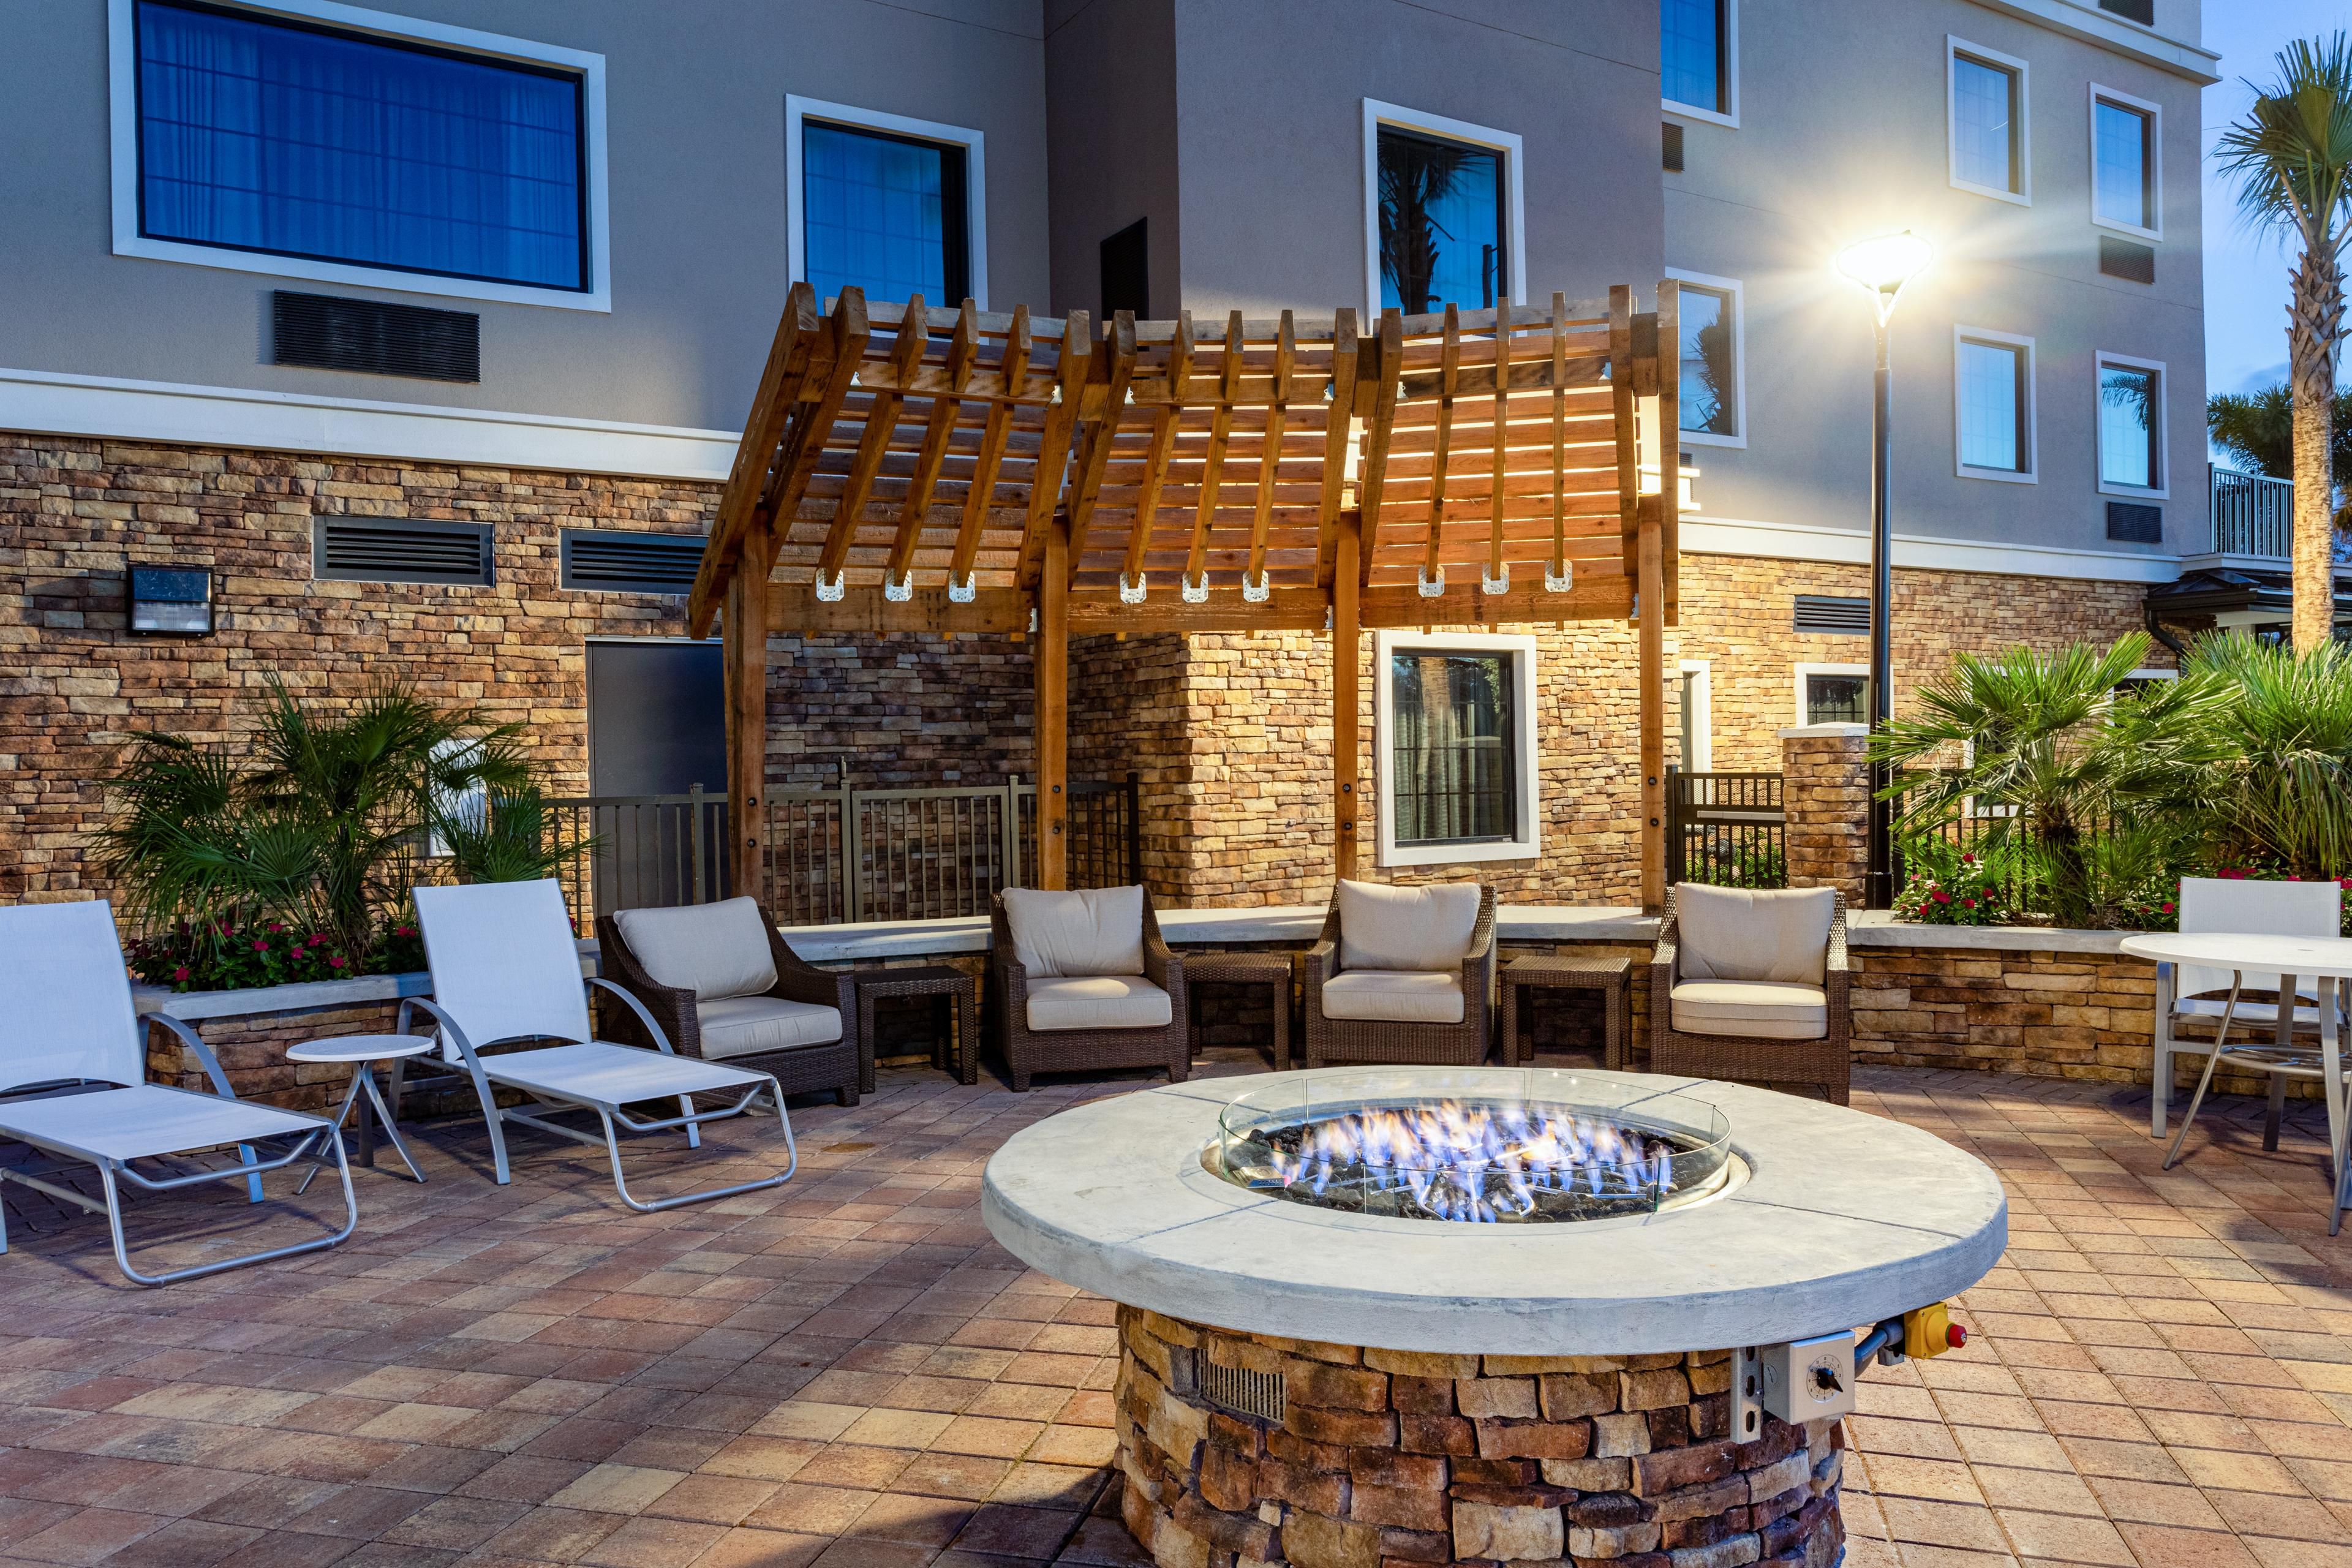 Come enjoy our fire pit located on our pool deck with a waterview.  After a long day away, enjoy your evening relaxing and unwinding outdoors.  